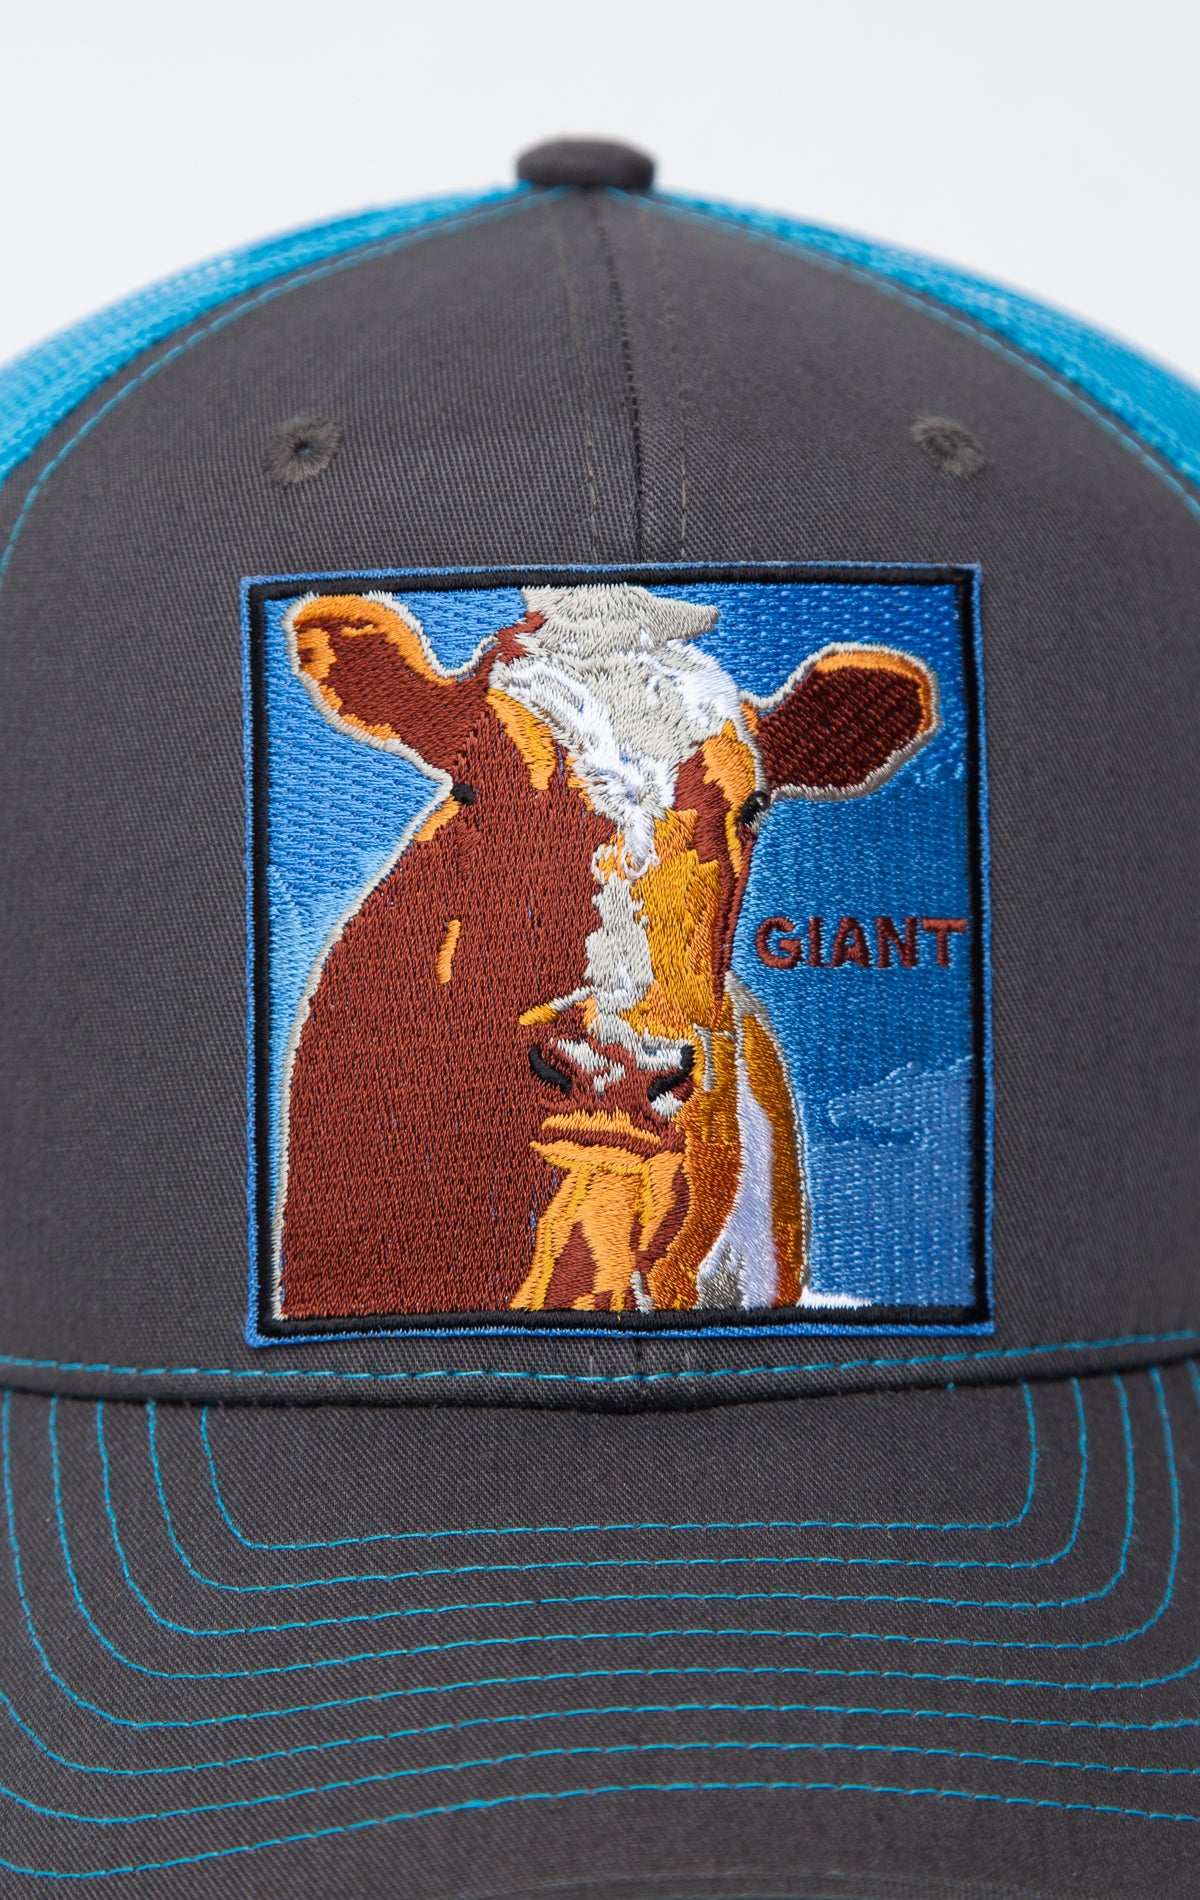 Black and blue trucker hat with cow giant graphic